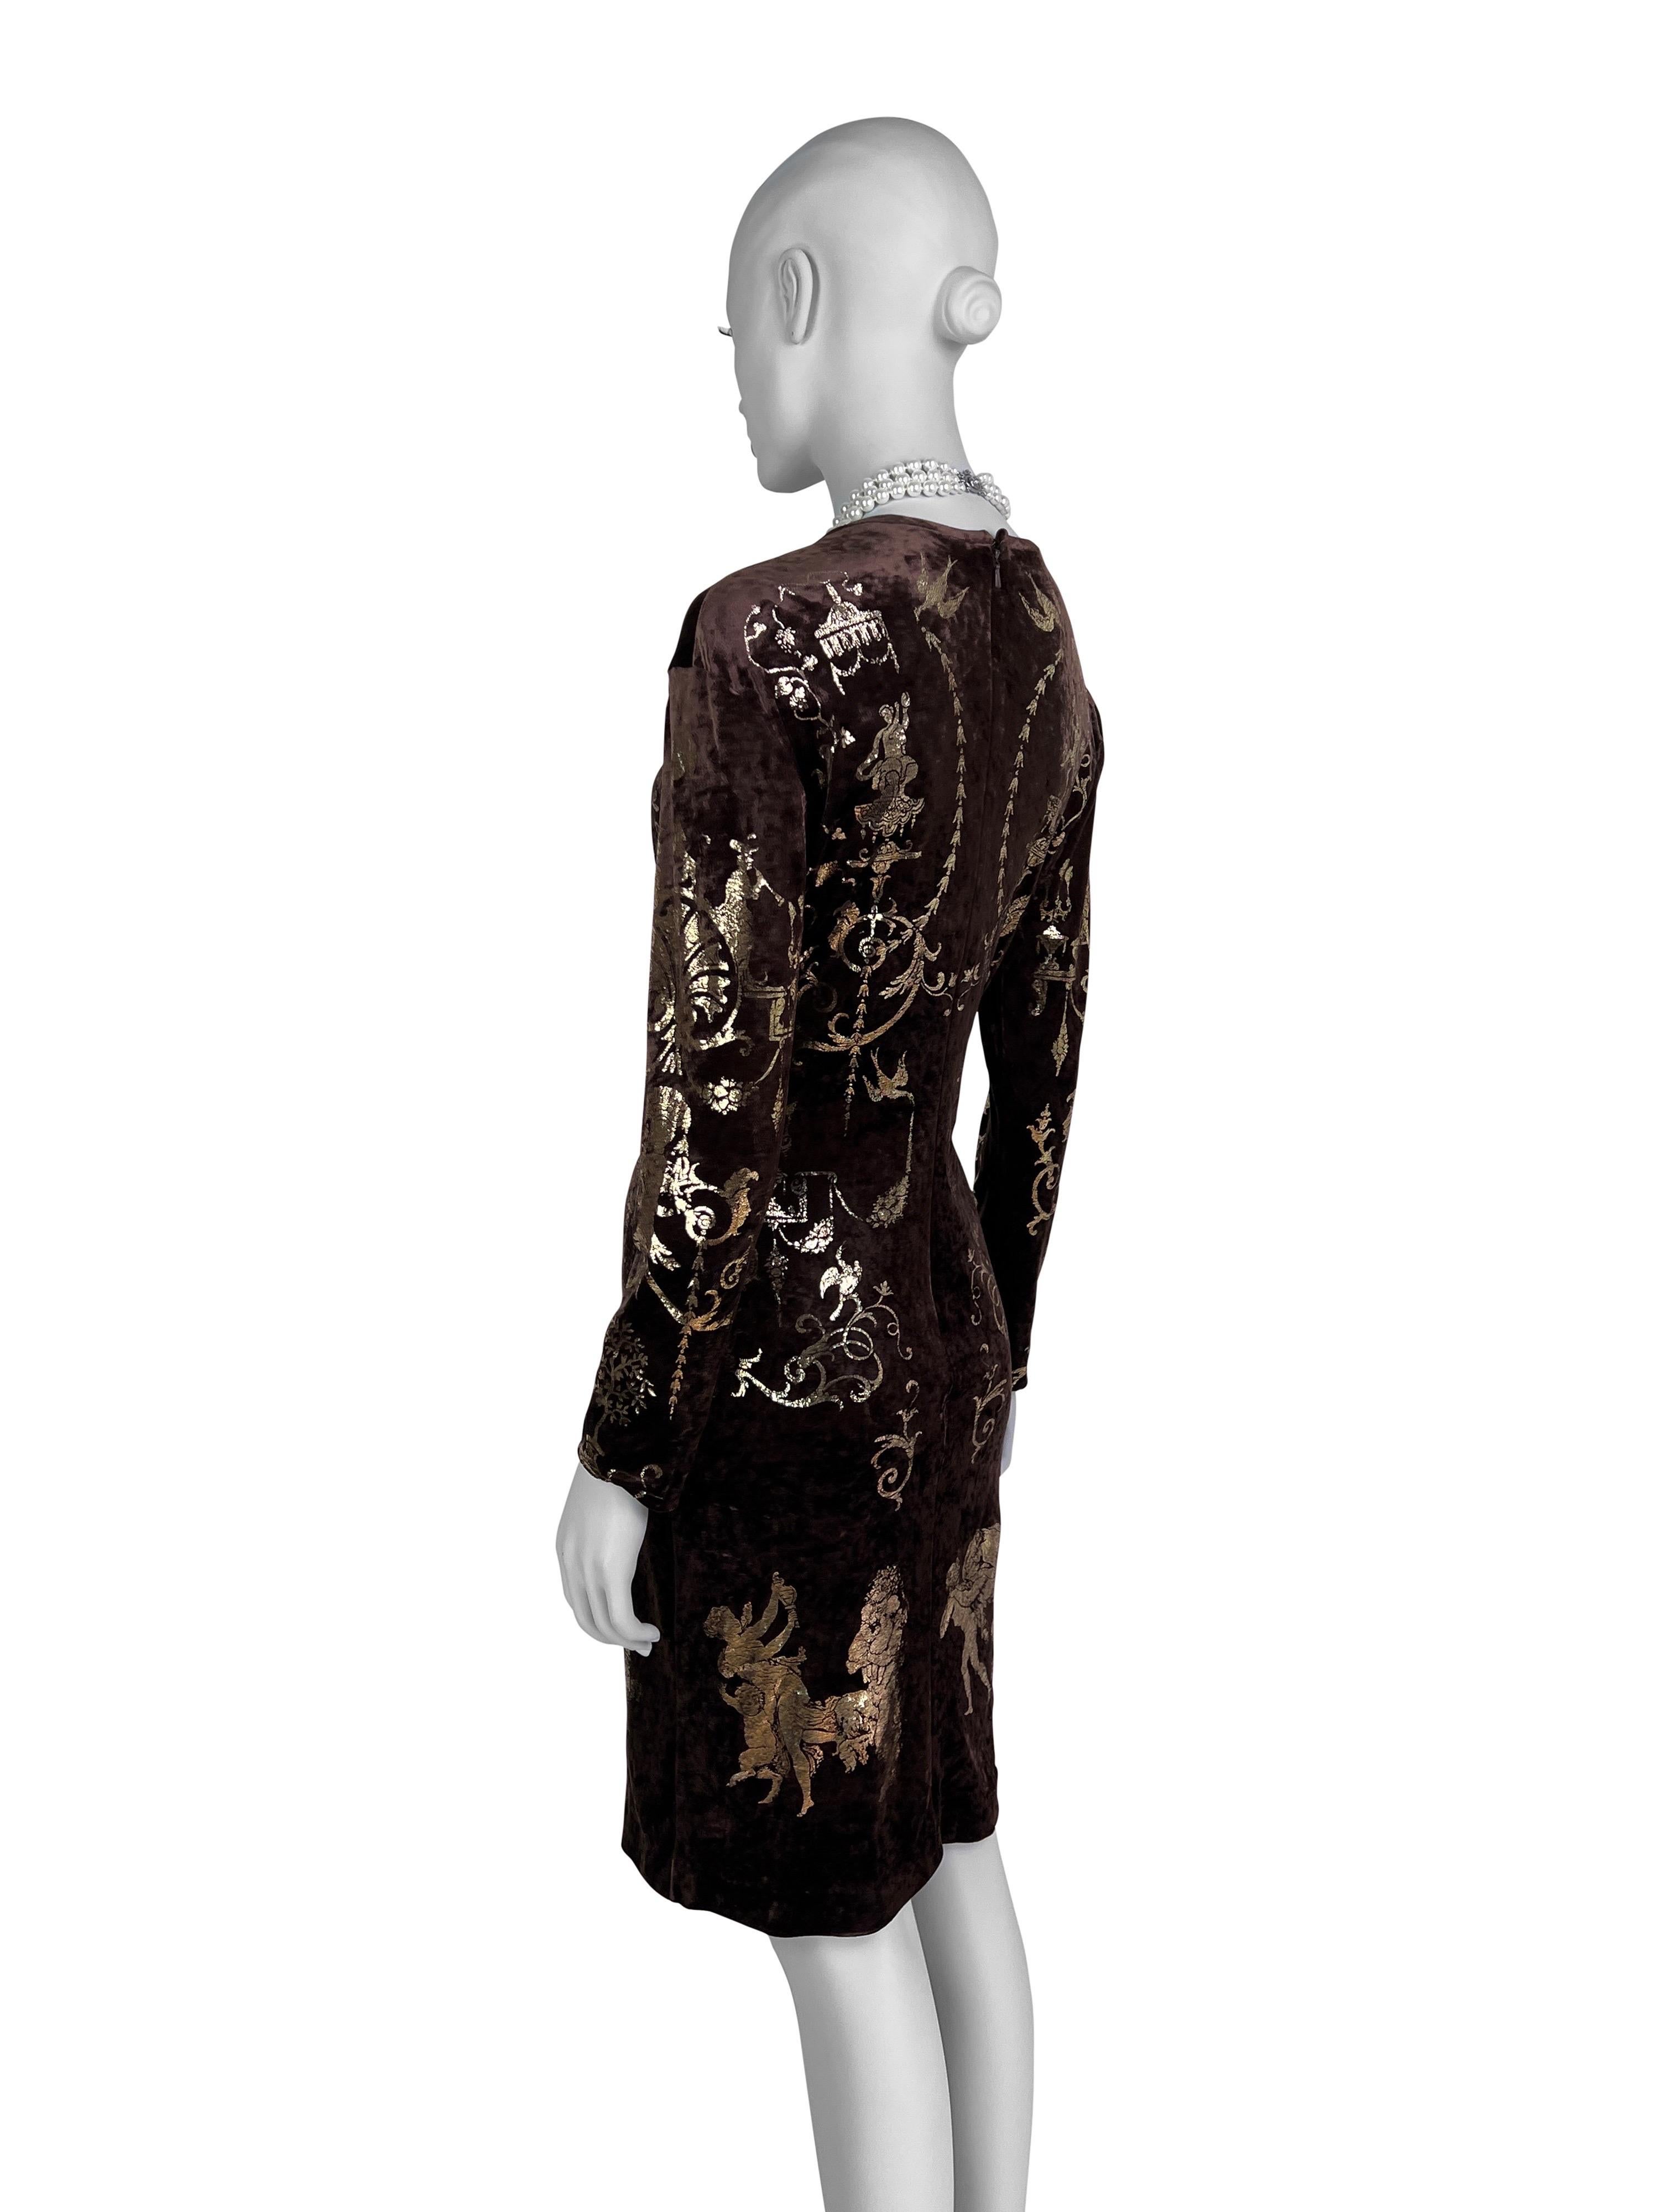 Vivienne Westwood Fall 1990 “Portrait Collection” Foiled “Boulle” Printed Velvet For Sale 7